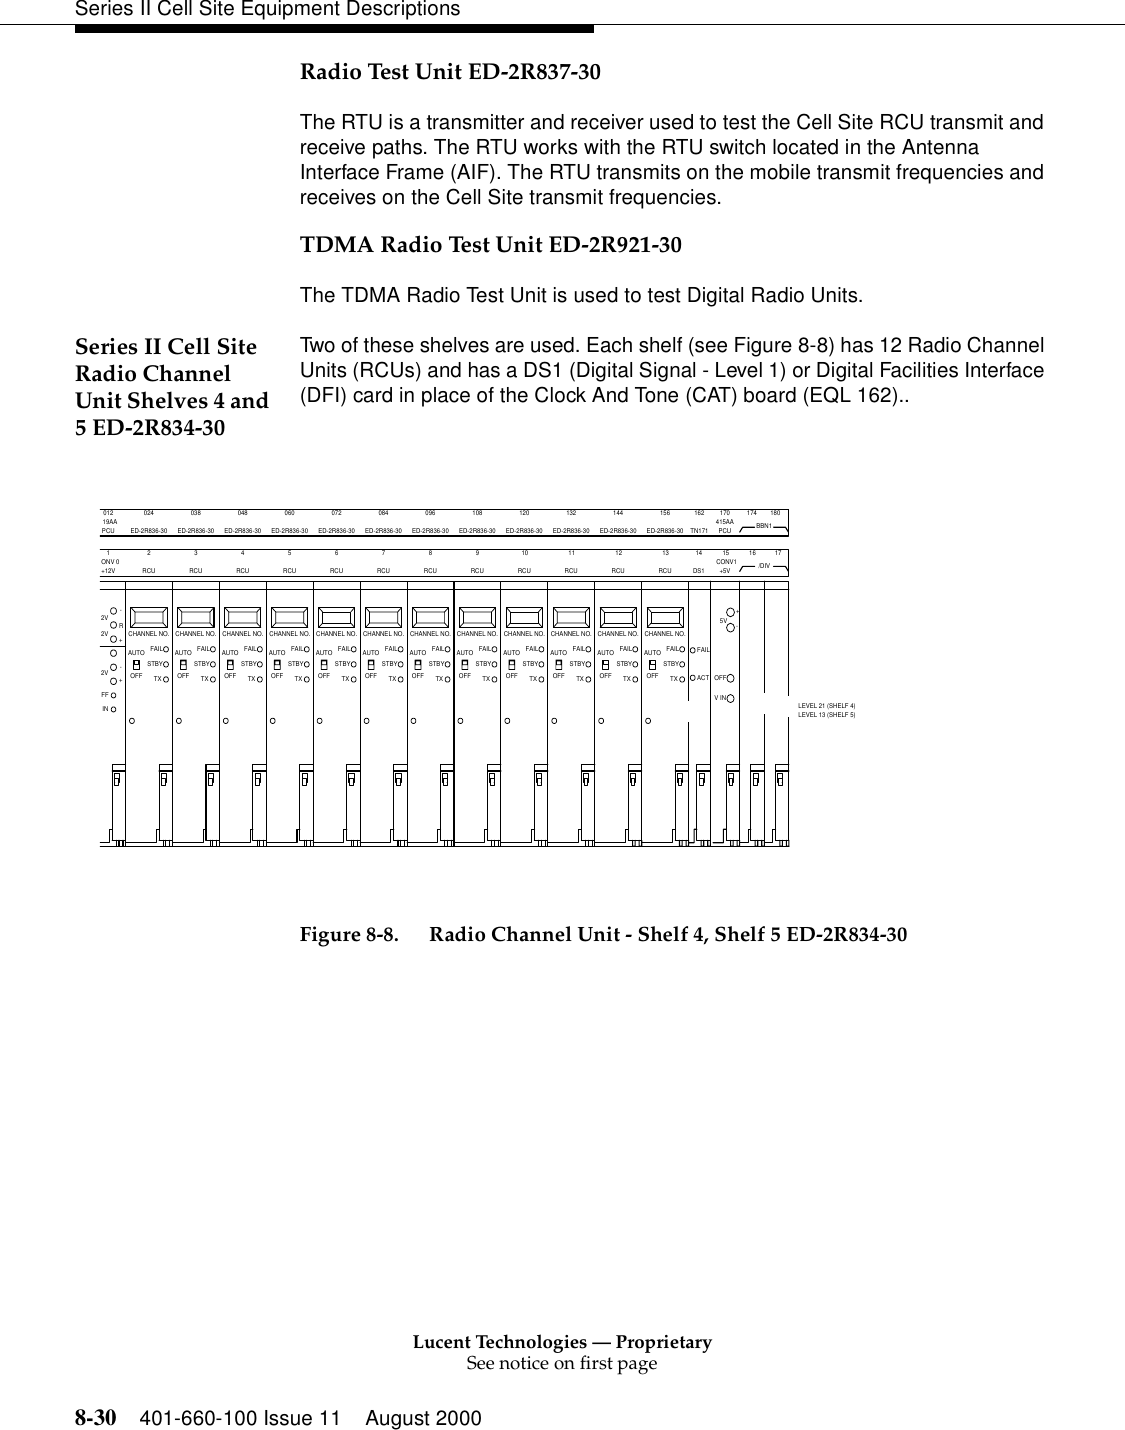 Lucent Technologies — ProprietarySee notice on first page8-30 401-660-100 Issue 11 August 2000Series II Cell Site Equipment DescriptionsRadio Test Unit ED-2R837-30The RTU is a transmitter and receiver used to test the Cell Site RCU transmit and receive paths. The RTU works with the RTU switch located in the Antenna Interface Frame (AIF). The RTU transmits on the mobile transmit frequencies and receives on the Cell Site transmit frequencies.TDMA Radio Test Unit ED-2R921-30The TDMA Radio Test Unit is used to test Digital Radio Units.Series II Cell Site Radio Channel Unit Shelves 4 and 5 ED-2R834-30Two of these shelves are used. Each shelf (see Figure 8-8) has 12 Radio Channel Units (RCUs) and has a DS1 (Digital Signal - Level 1) or Digital Facilities Interface (DFI) card in place of the Clock And Tone (CAT) board (EQL 162)..Figure 8-8. Radio Channel Unit - Shelf 4, Shelf 5 ED-2R834-30PCU19AA012ED-2R836-30ED-2R836-30038024ED-2R836-30048 060+- INFF2V OFF+AUTO2+12VONV 012V2V R-3AT&amp;TAT&amp;TSTBYTXOFFAUTOSTBYTXFAILRCURCUCHANNEL NO.FAILOFFCHANNEL NO.AUTO4RCUAT&amp;TSTBYTXFAIL5OFFAUTOCHANNEL NO.RCUOFFAT&amp;TSTBYTXFAILLEVEL 13 (SHELF 5)CONV1BBN1180174PCU415AA170ED-2R836-30 TN171162156LEVEL 21 (SHELF 4)V INOFFAT&amp;TAT&amp;T/DIV+5V171615-+5VACTFAILAT&amp;TDS114AT&amp;TSTBYTXFAIL13RCUOFFAUTOCHANNEL NO.072ED-2R836-306AUTOCHANNEL NO.RCUED-2R836-30084ED-2R836-30108ED-2R836-30ED-2R836-30096ED-2R836-30ED-2R836-30ED-2R836-301441321207STBYTX OFFAUTOFAILRCUAT&amp;TTXAT&amp;TCHANNEL NO.9RCUAT&amp;TSTBYTXFAILOFFAUTOOFFAUTOCHANNEL NO.8RCUAT&amp;TSTBYTXFAILOFFAUTOCHANNEL NO.STBYFAILCHANNEL NO.TX12RCUAT&amp;TSTBYFAIL1110RCURCUAT&amp;TAT&amp;TOFFAUTOCHANNEL NO.STBYTXFAILOFFAUTOCHANNEL NO.STBYTXFAILCHANNEL NO.